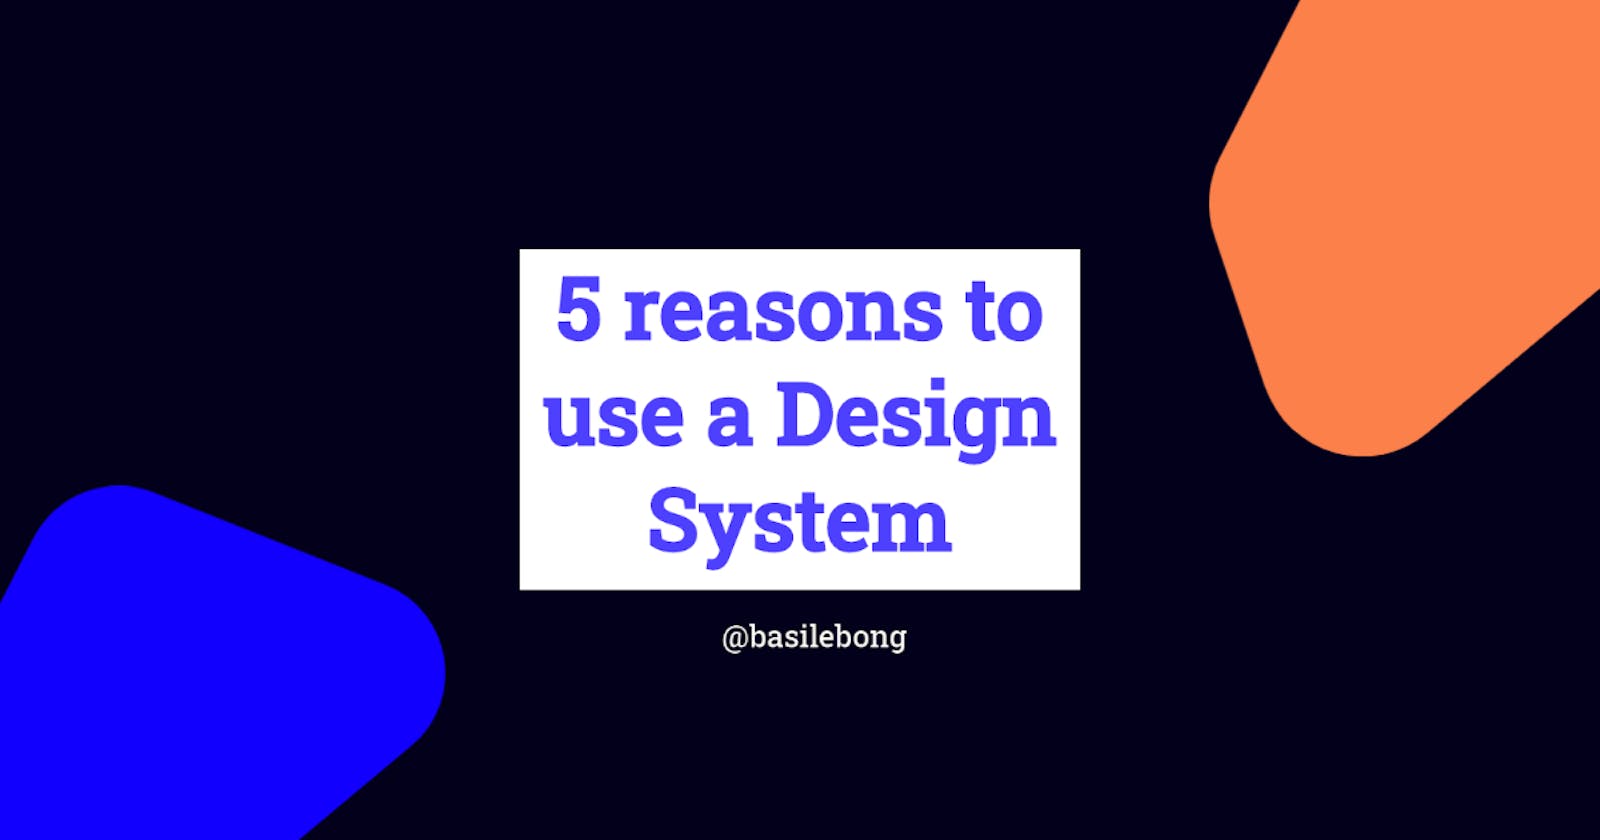 5 reasons to use a Design System